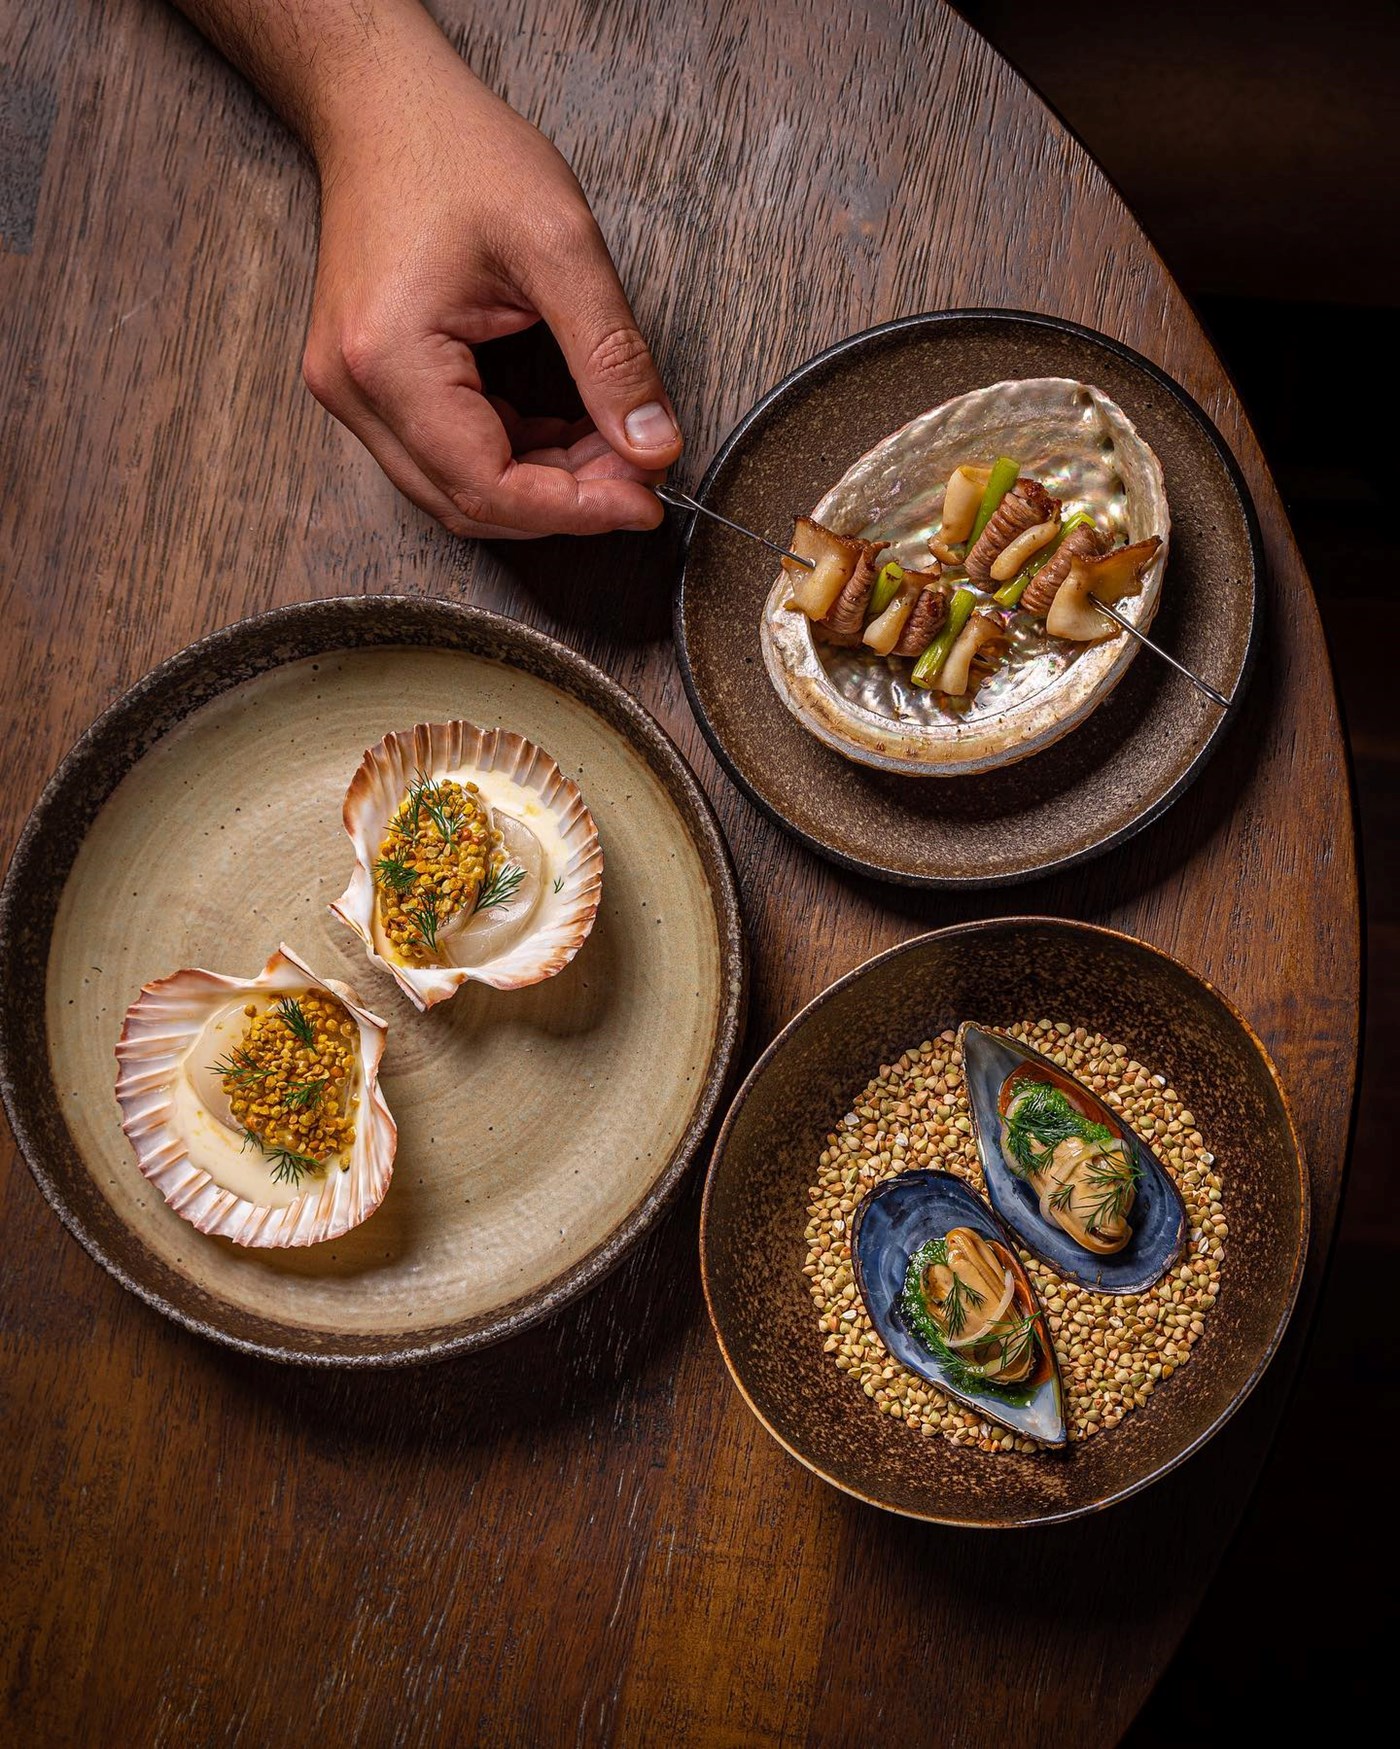 Best Fine Dining Canberra: Three minimalist dishes including scallops, mussels and skewers at Otis in Canberra. 